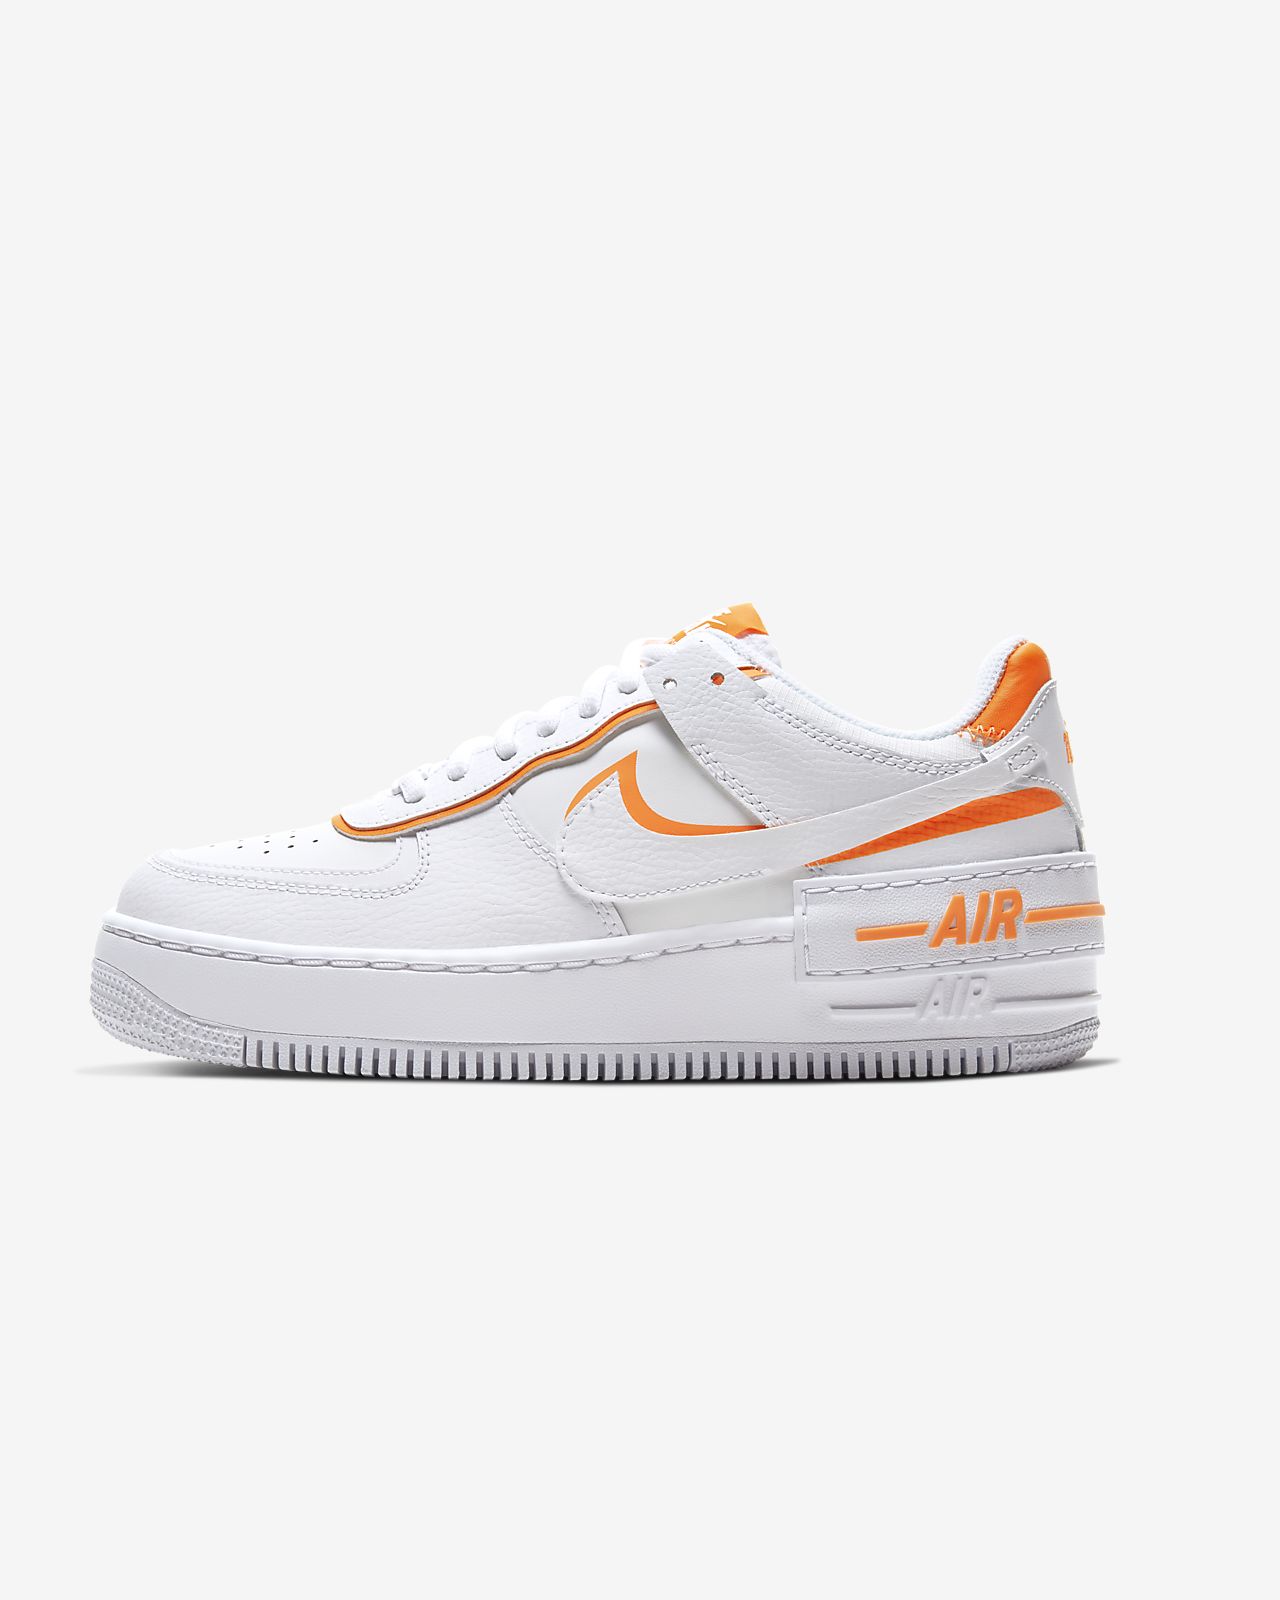 chaussure pour femme nike air force 1 shadow